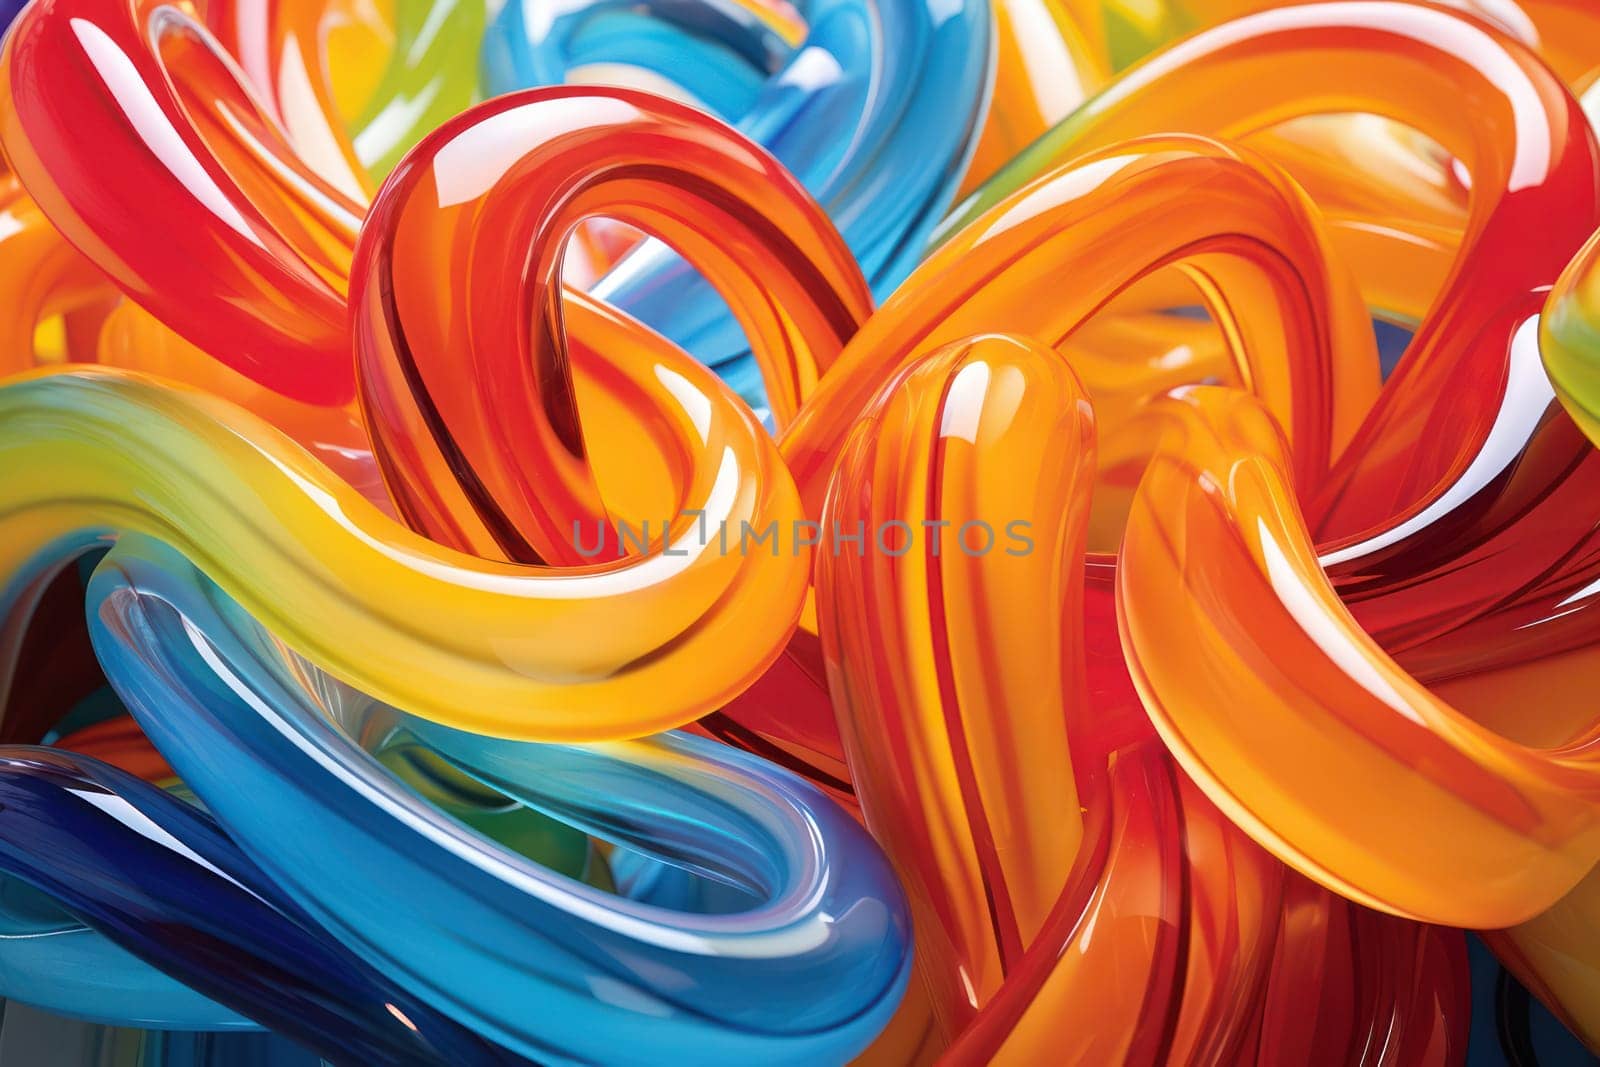 Vibrant Colorful Rainbow Swirl: A Creative Closeup of Delicious and Unhealthy Candy on a Bright Abstract Background by Vichizh